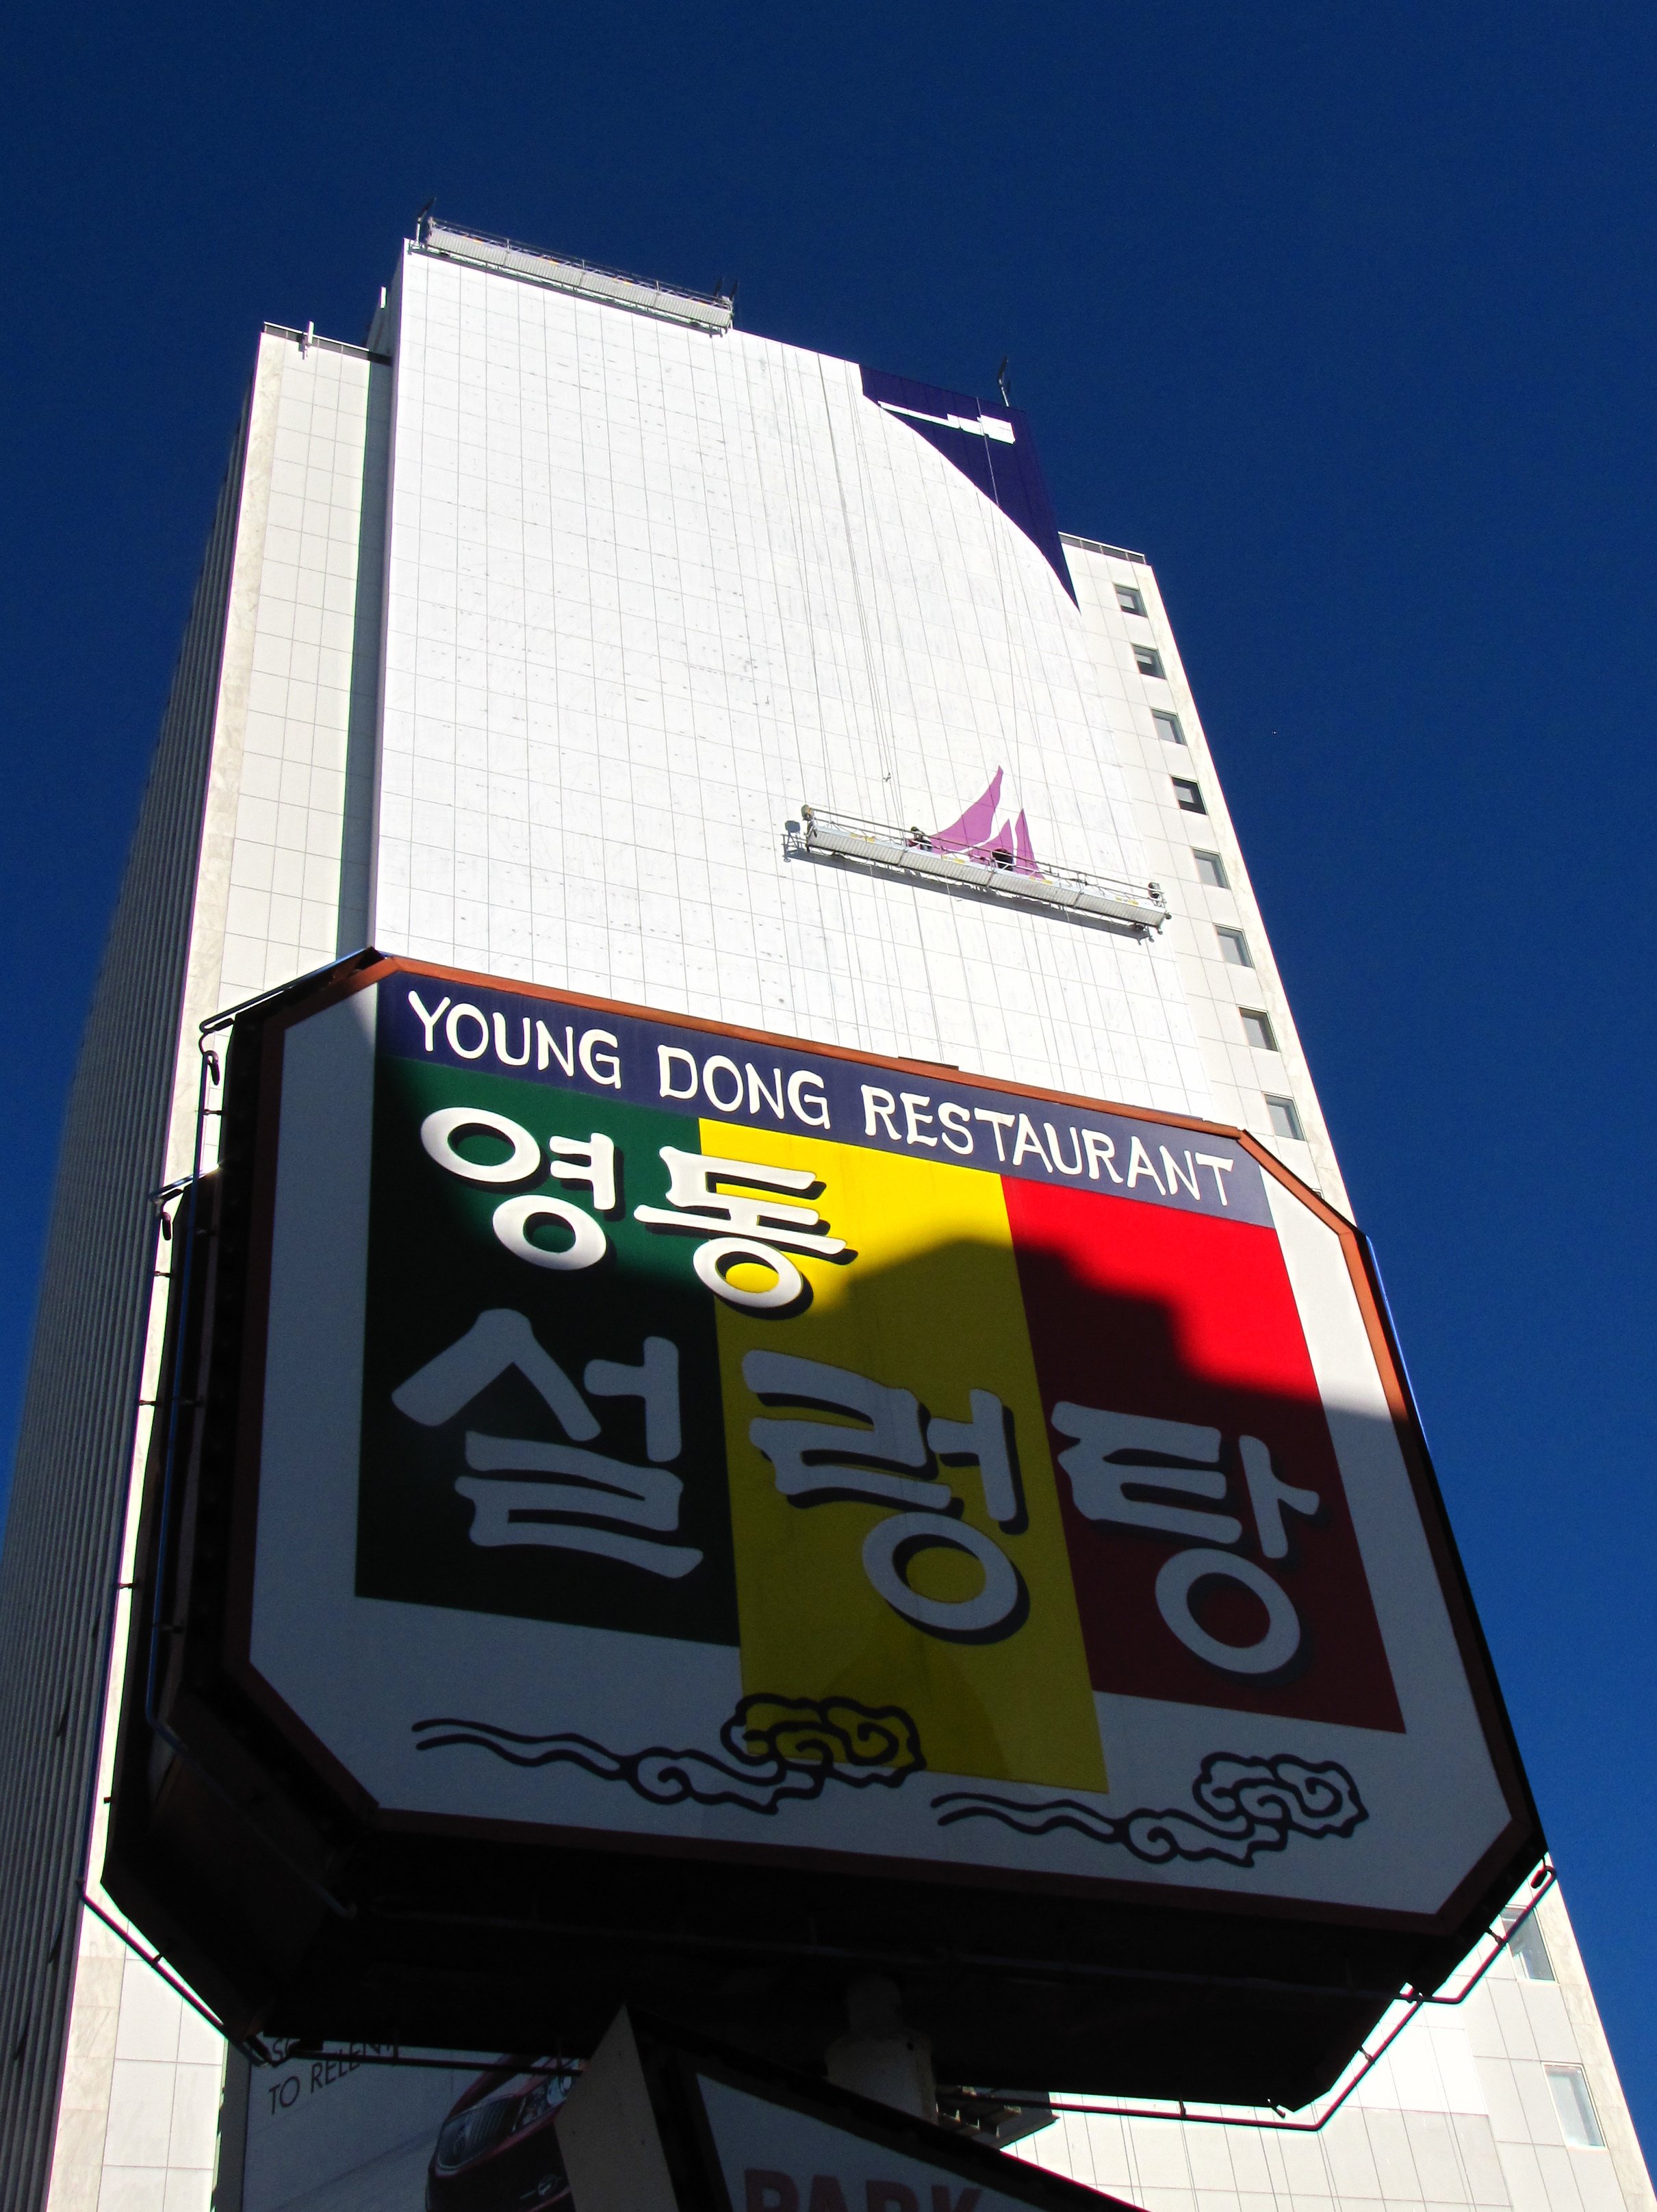 Young Dong Restaurant Sign in Koreatown